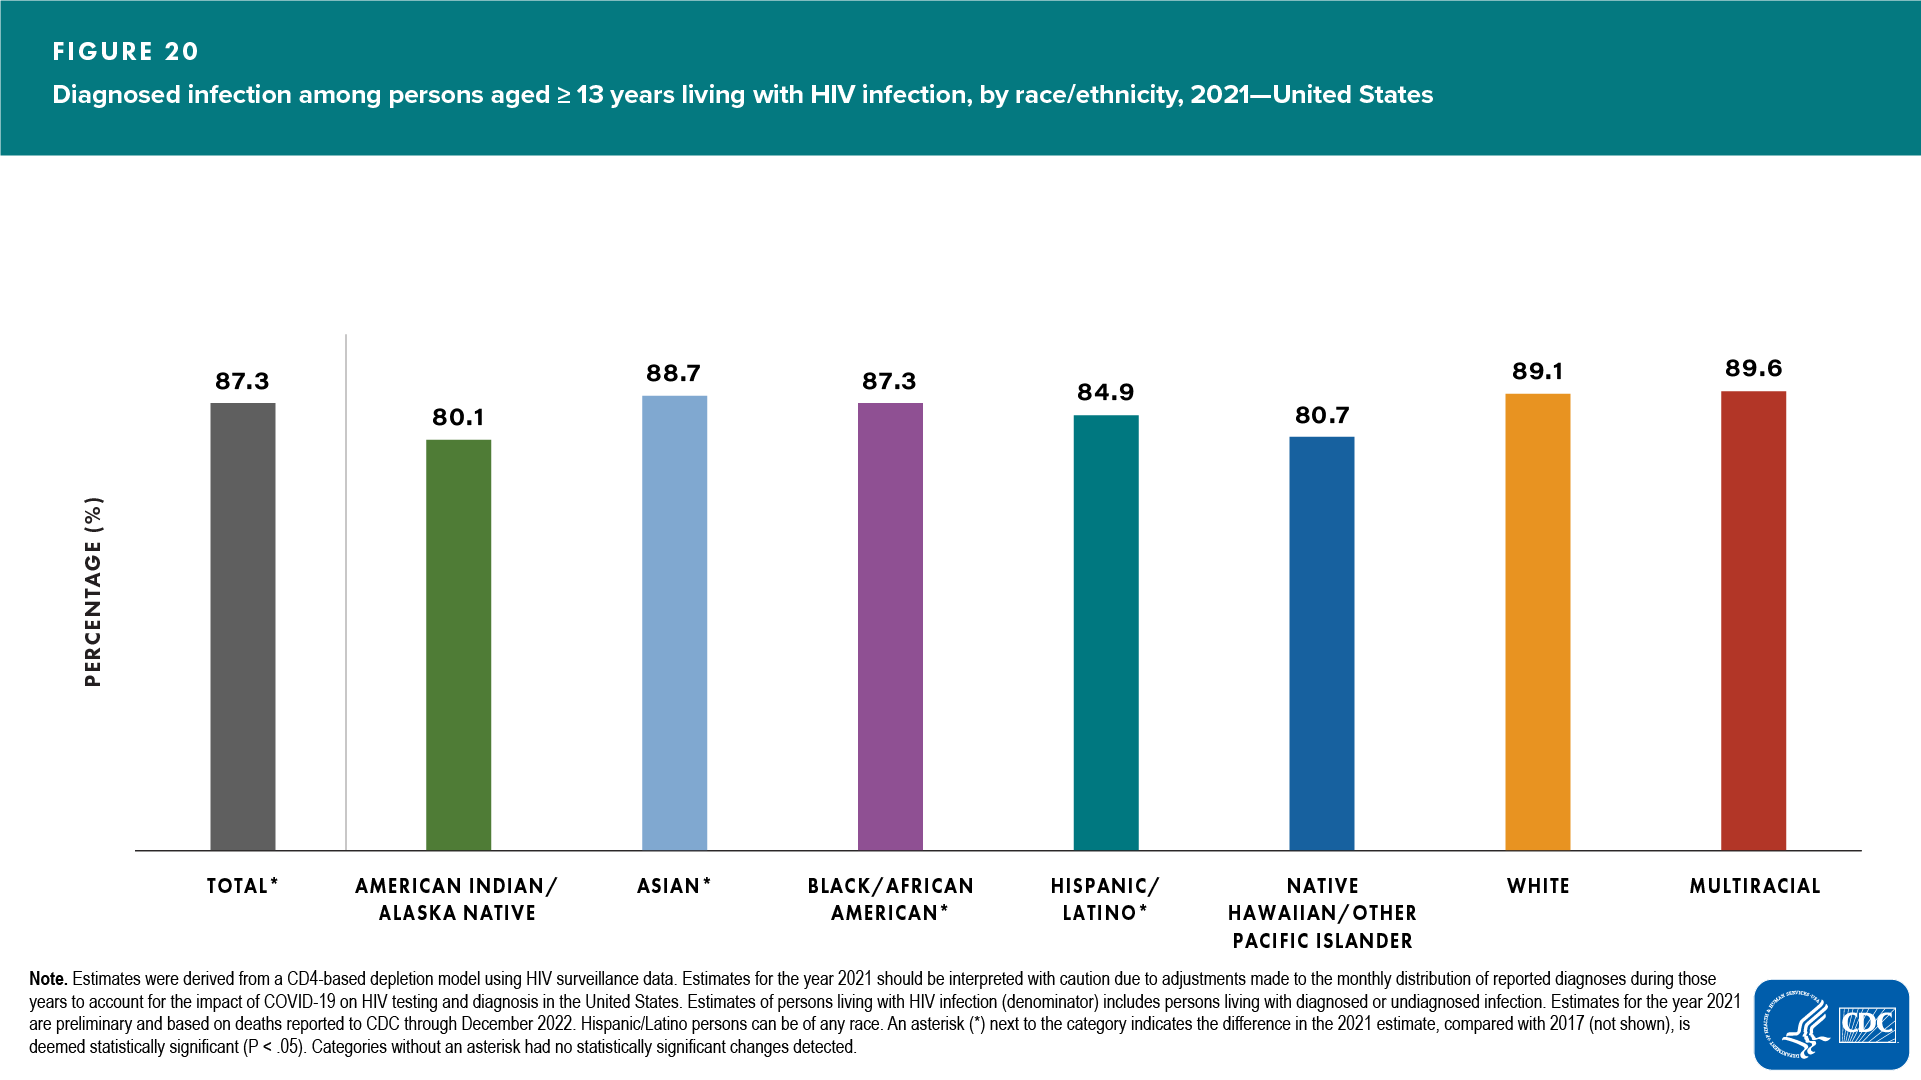 Figure 20. Diagnosed infection among persons aged ≥13 years living with diagnosed or undiagnosed HIV infection, by race/ethnicity, 2021—United States